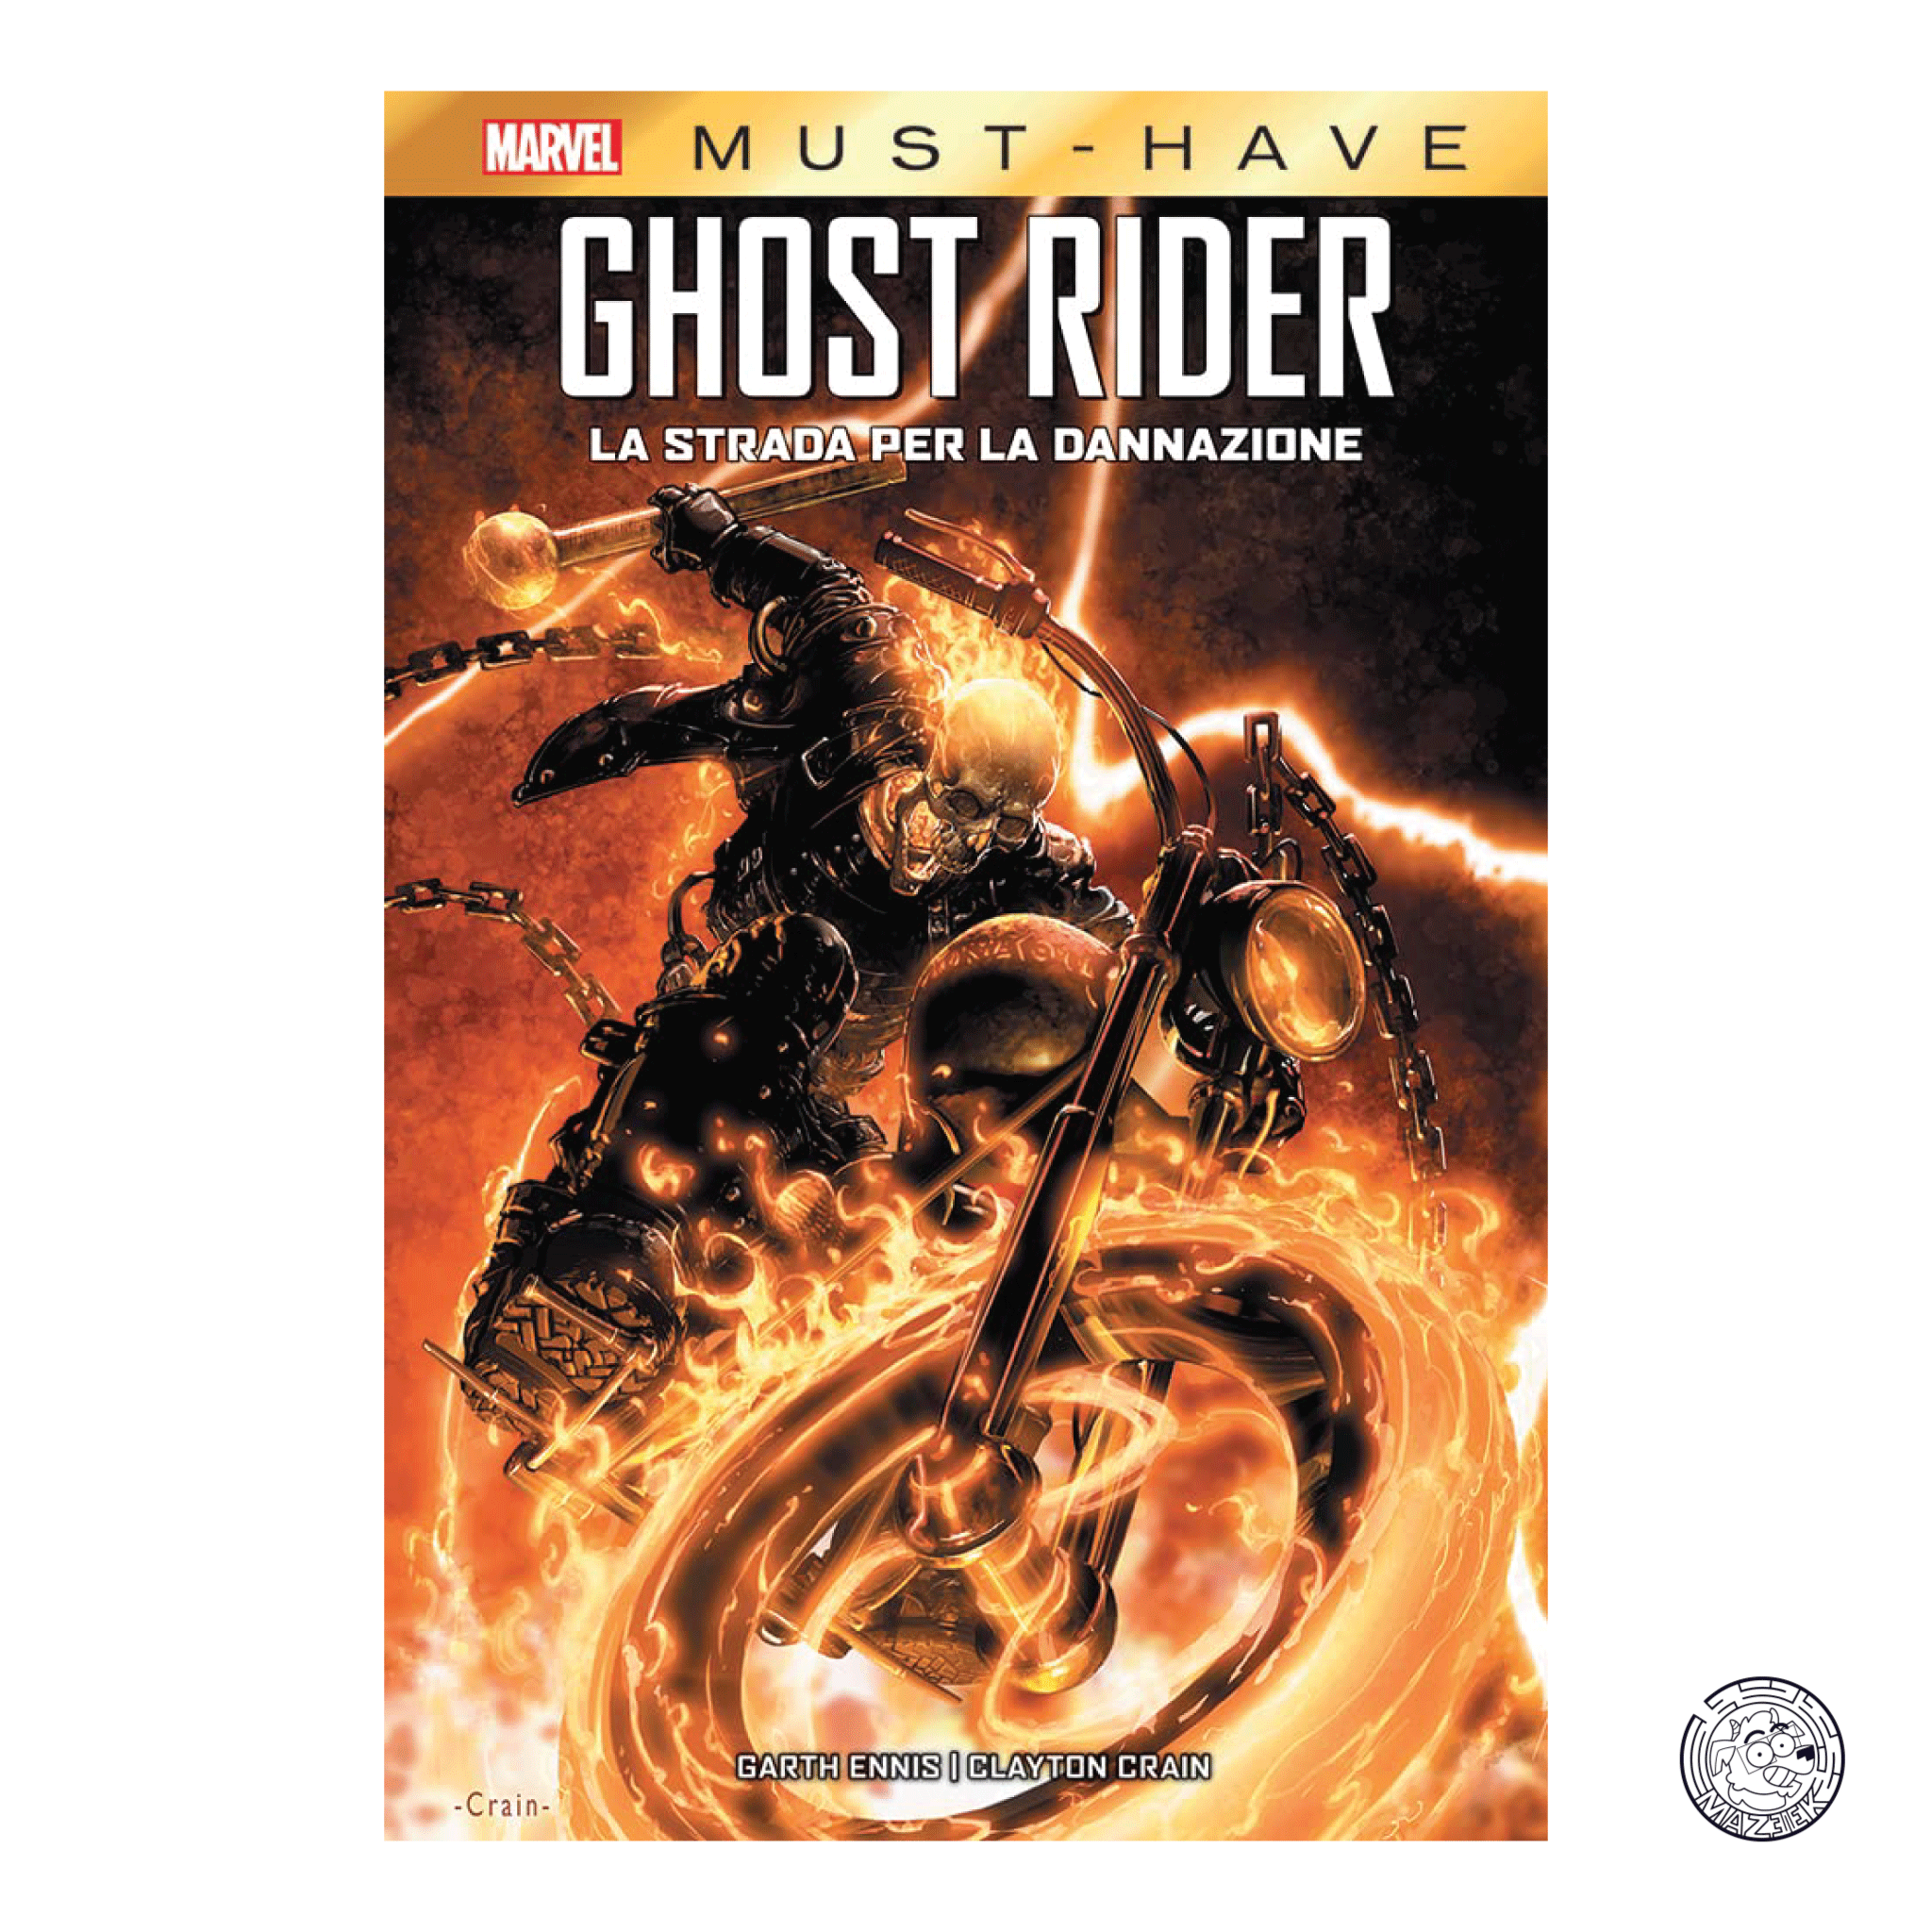 Marvel Must Have - Ghost Rider The Road to Damnation